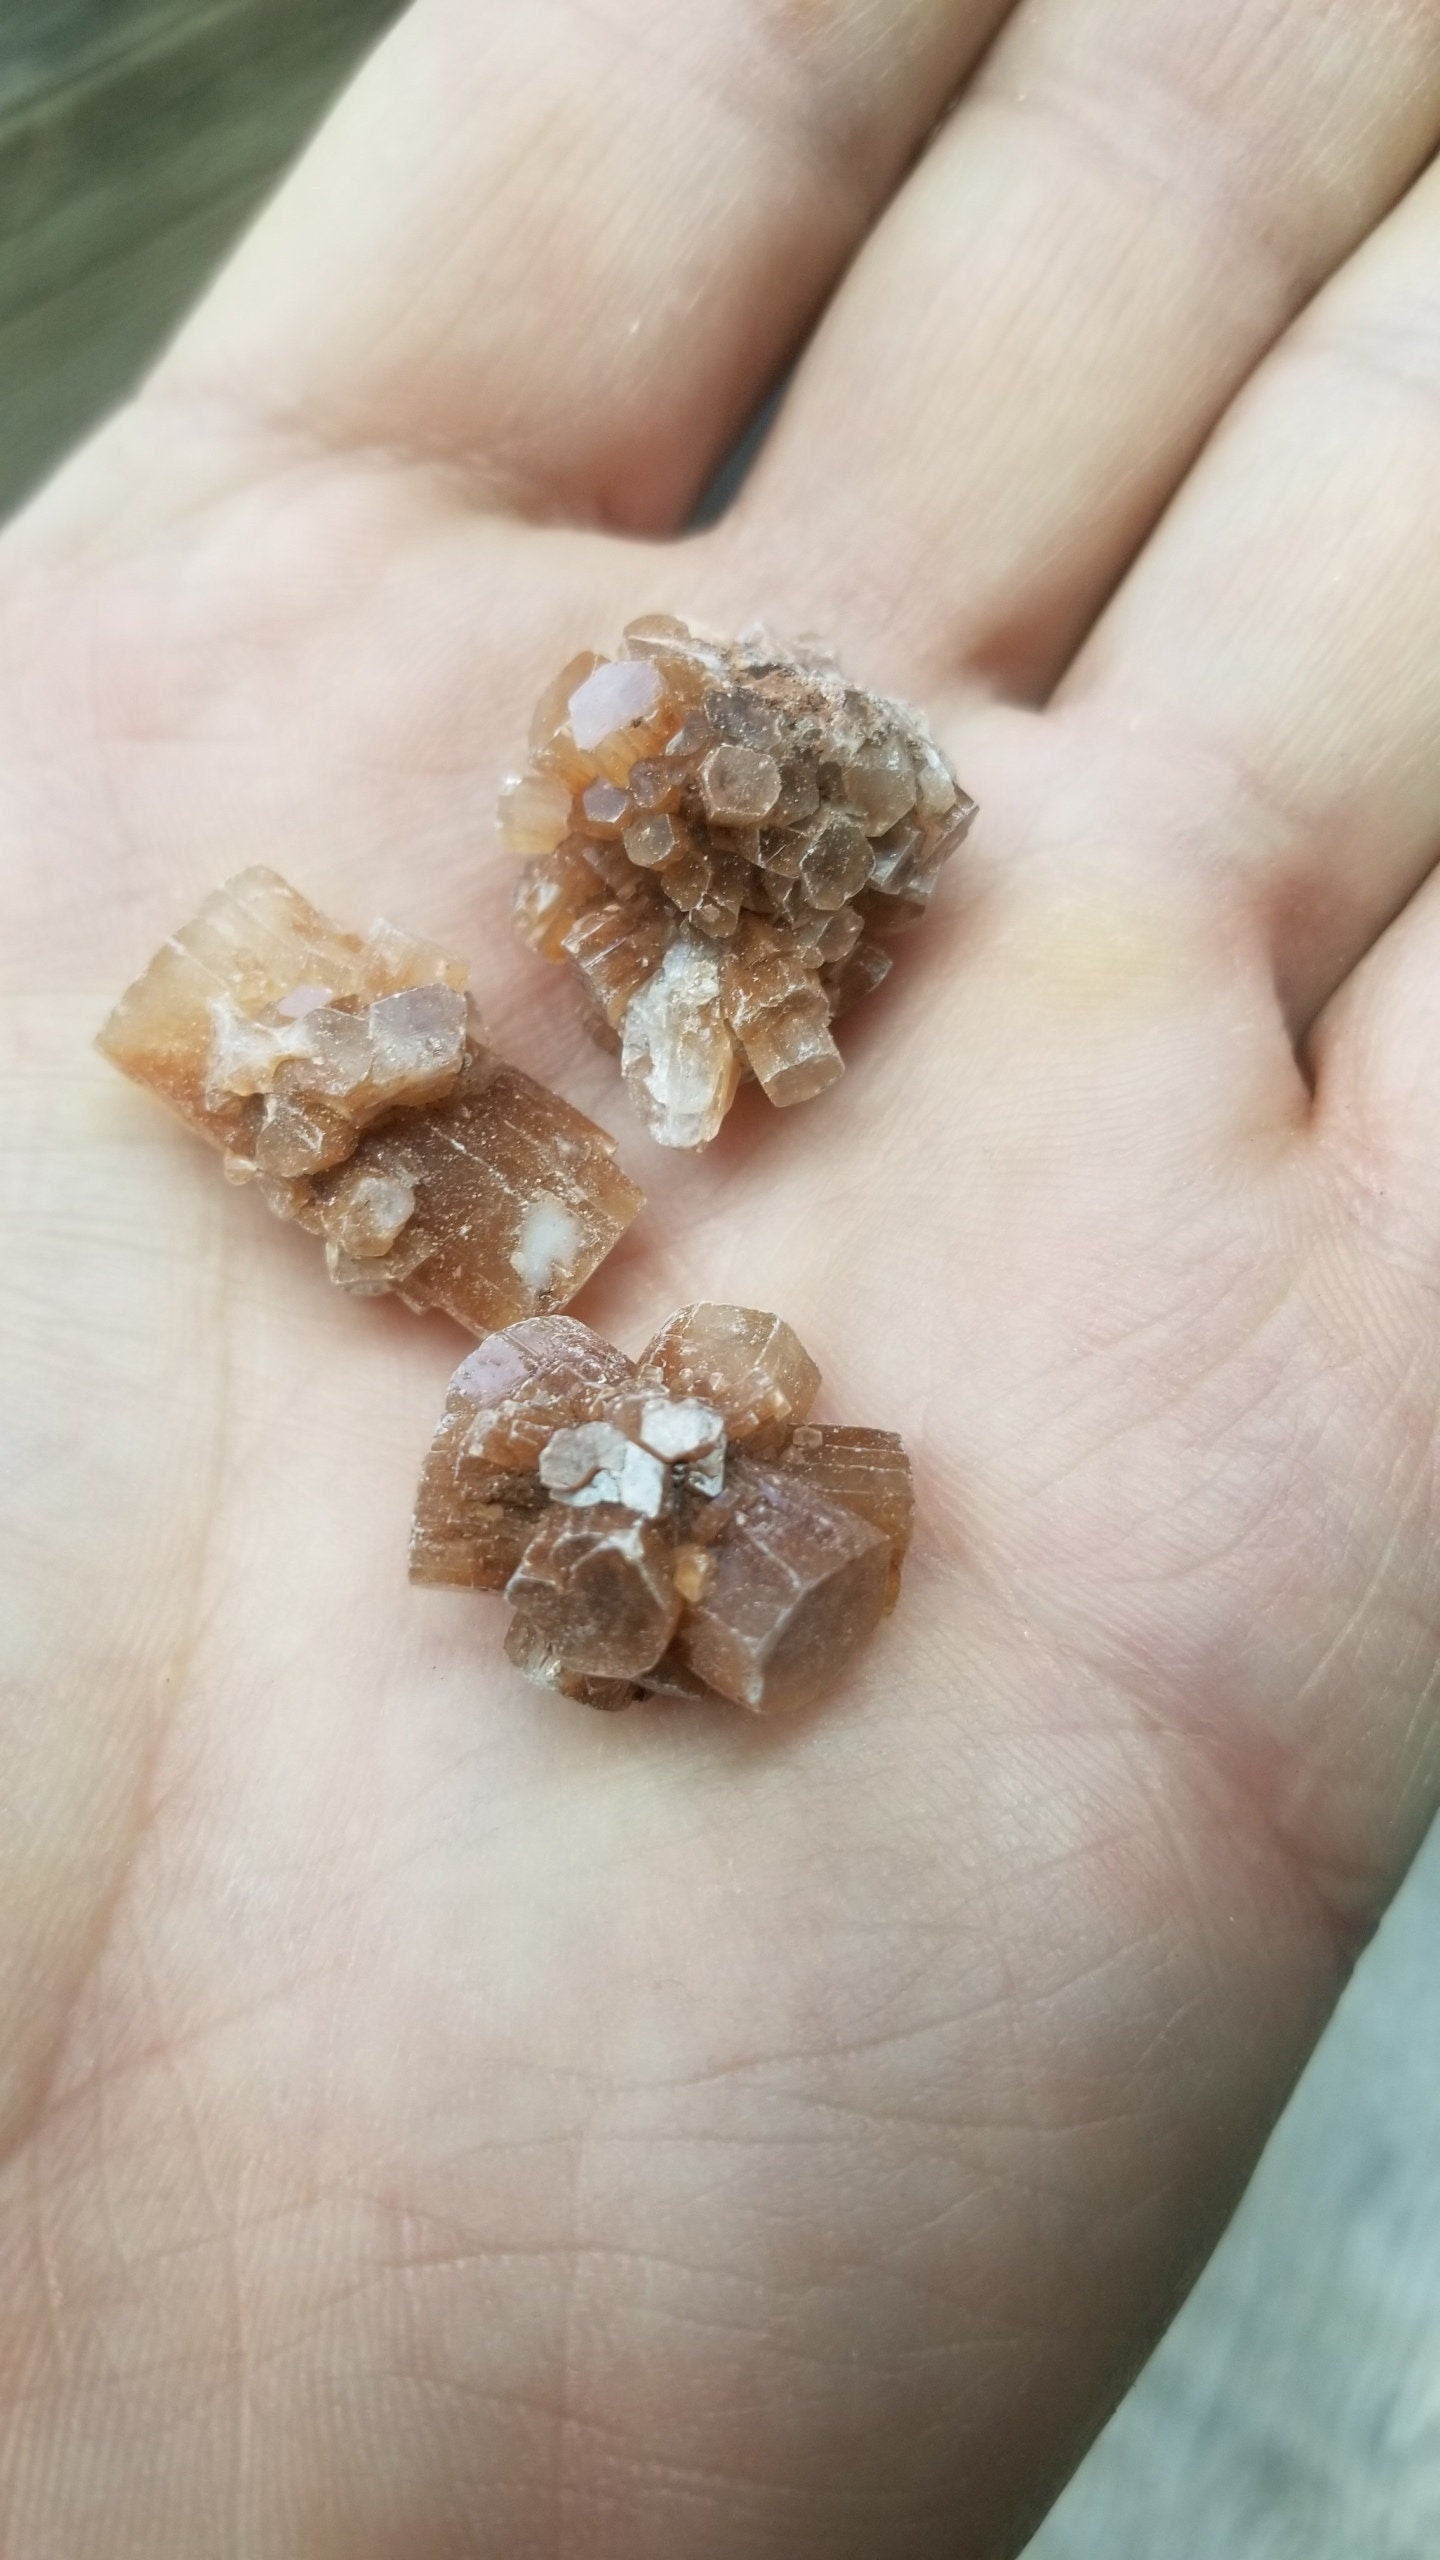 Aragonite Small Crystal Cluster Explosion. Grounding Focused Attention 1300 (Approx. 3/4" - 1 1/4")